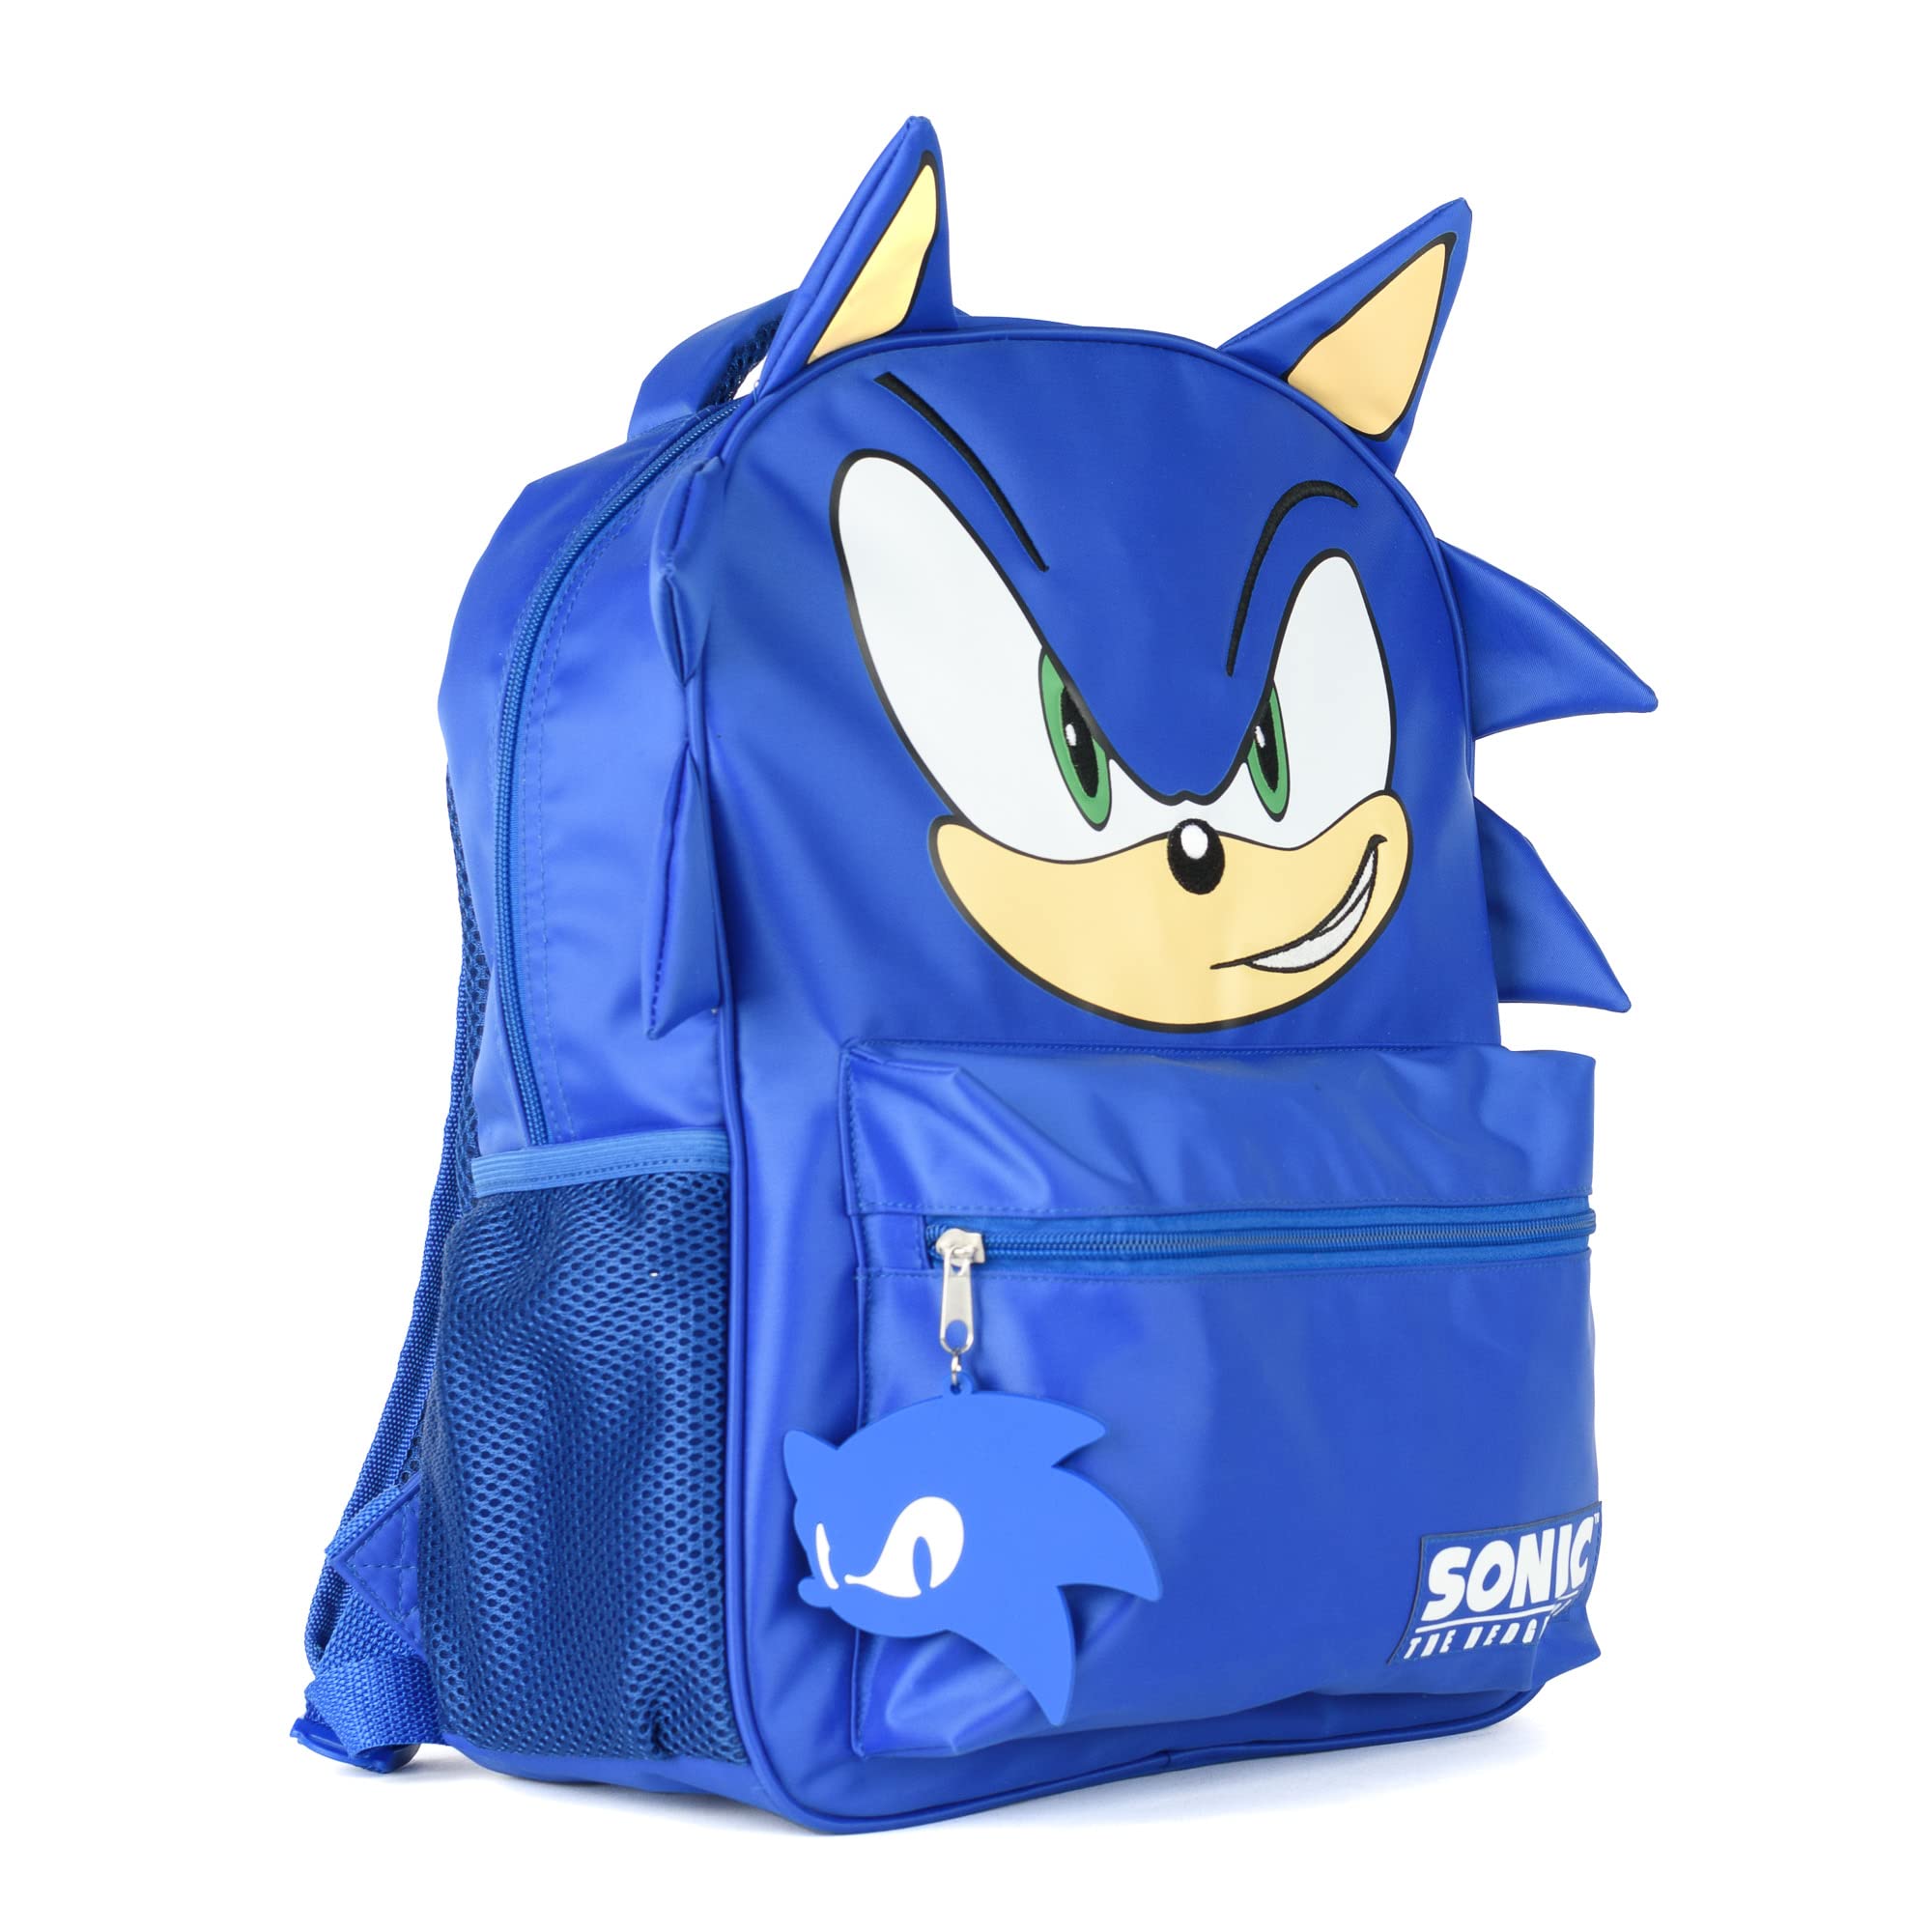 AI ACCESSORY INNOVATIONS Sonic Backpack for Boys & Girls, Bookbag with Adjustable Shoulder Straps & Padded Back,16 Inch Schoolbag with 3D Features